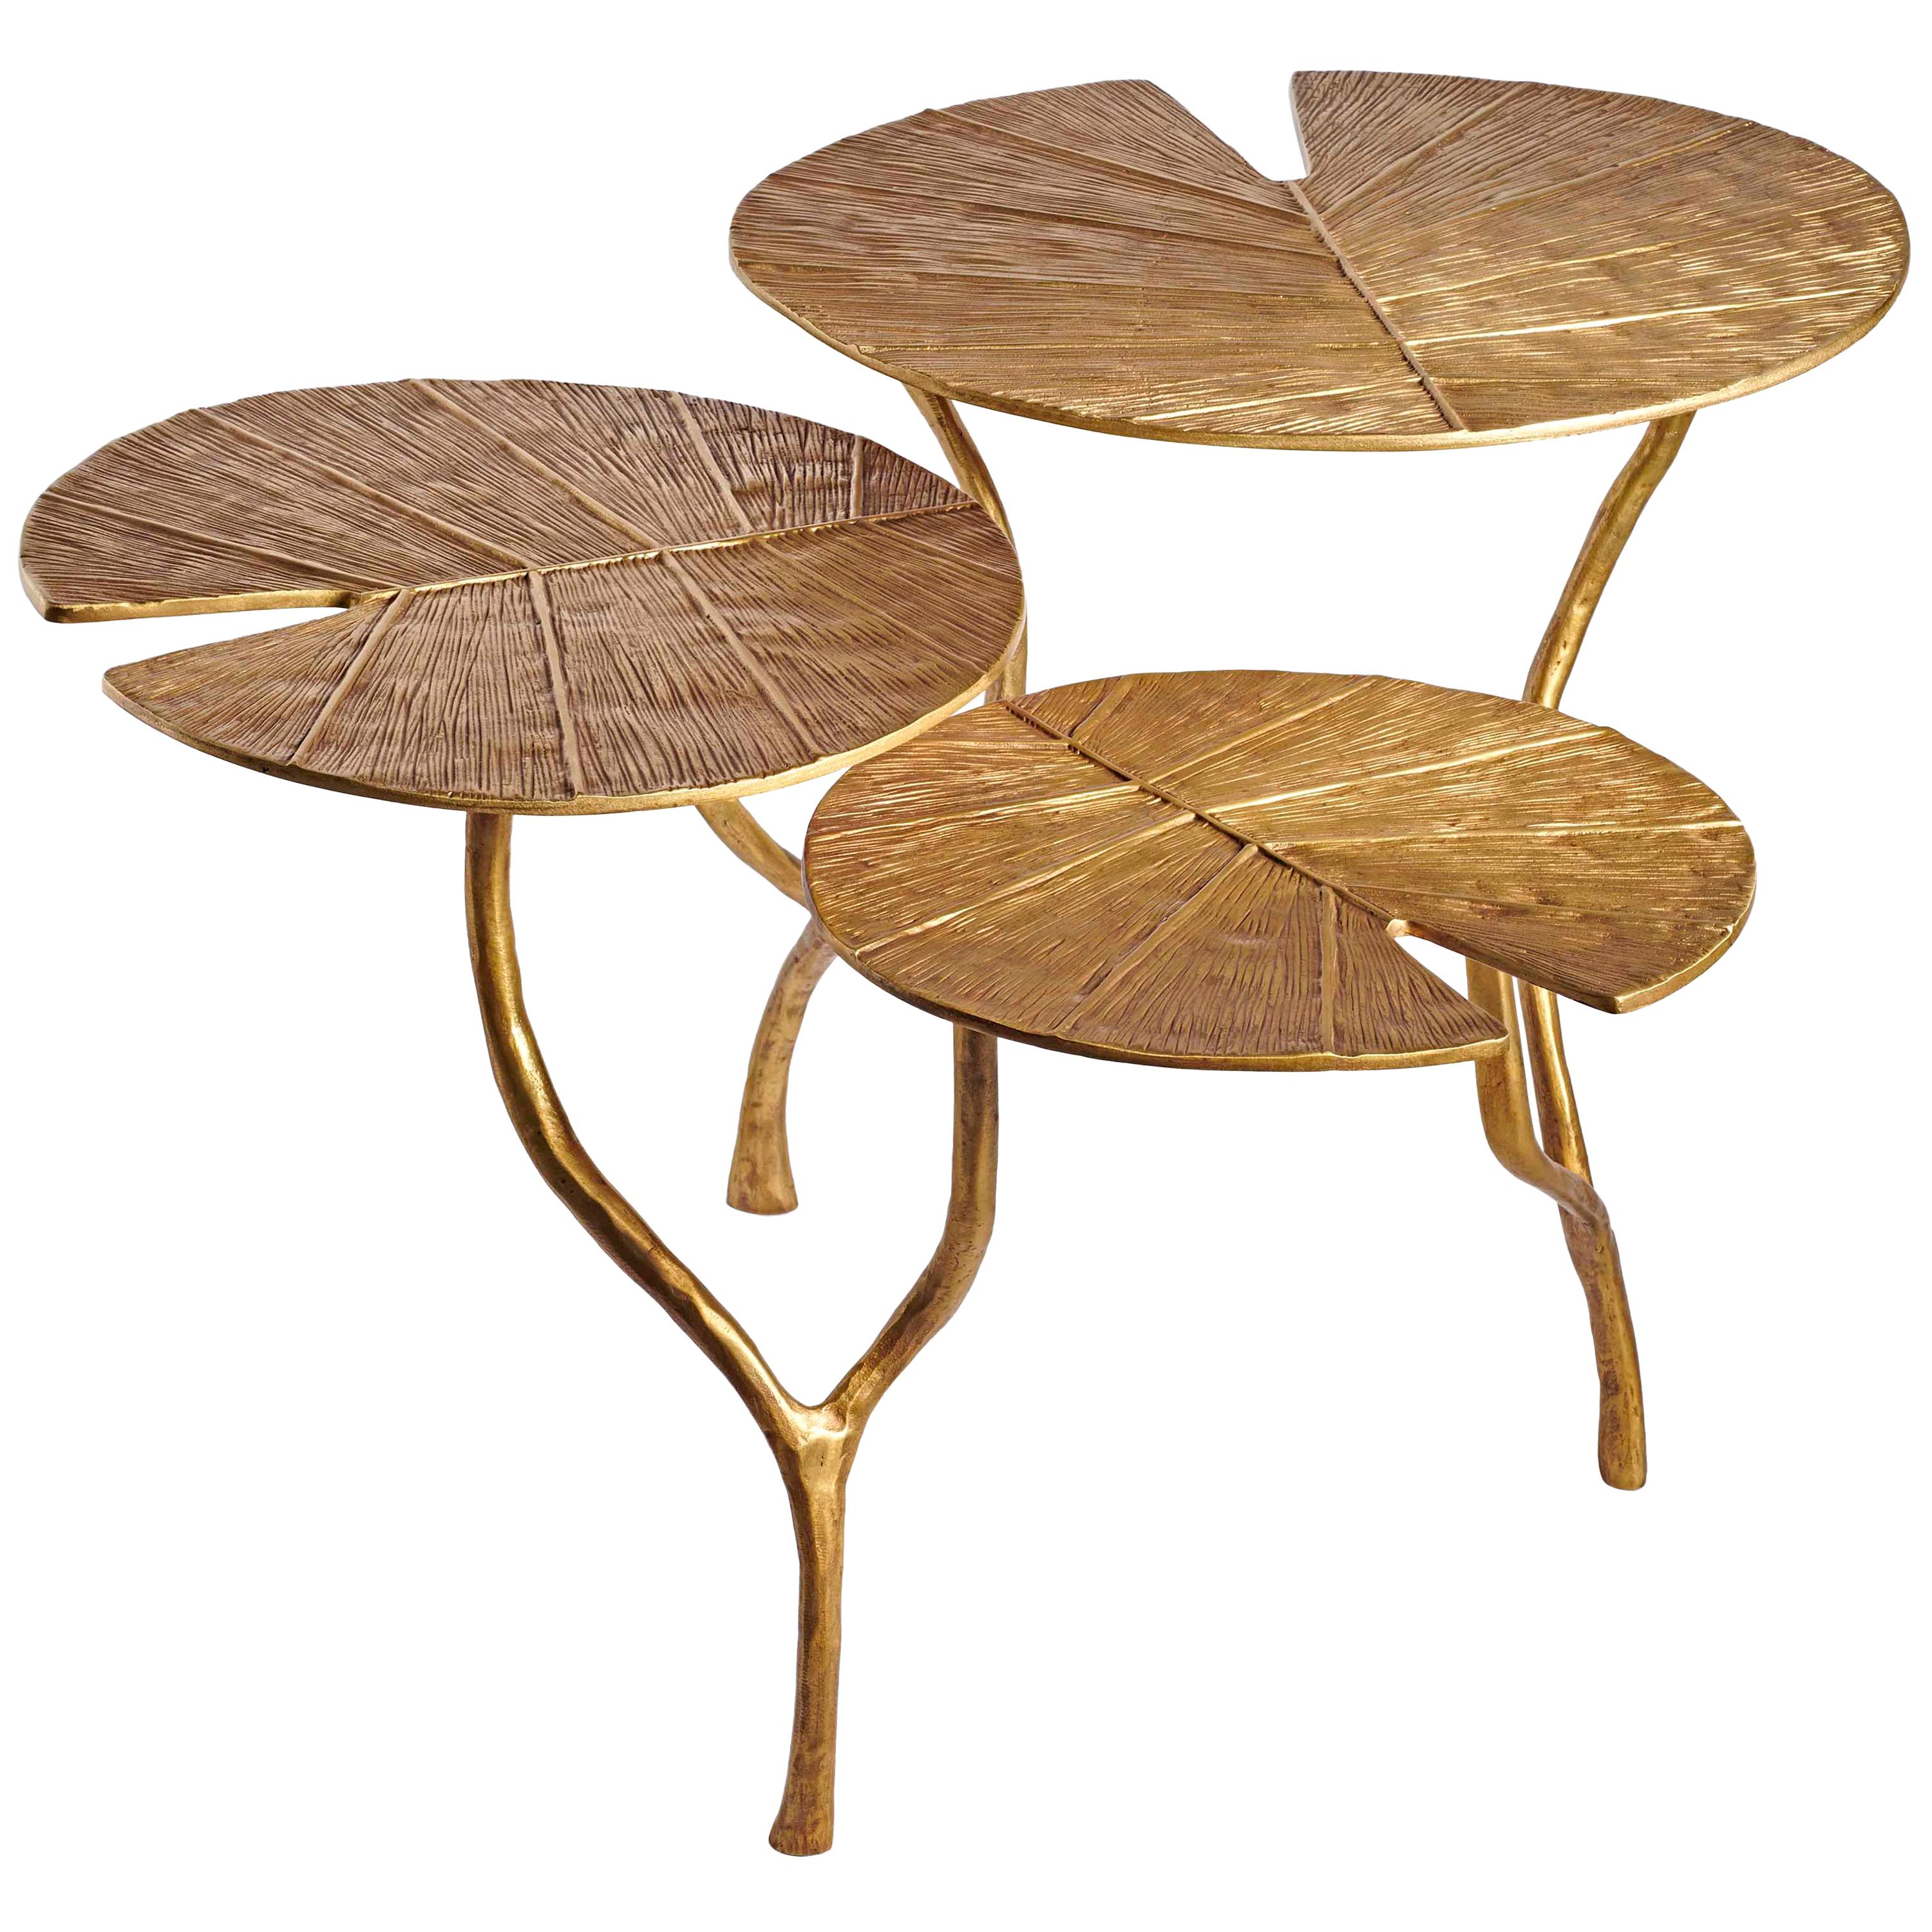 Franck Evennou, "Lotus" Three Leaves Coffee Table Limited Edition For Sale